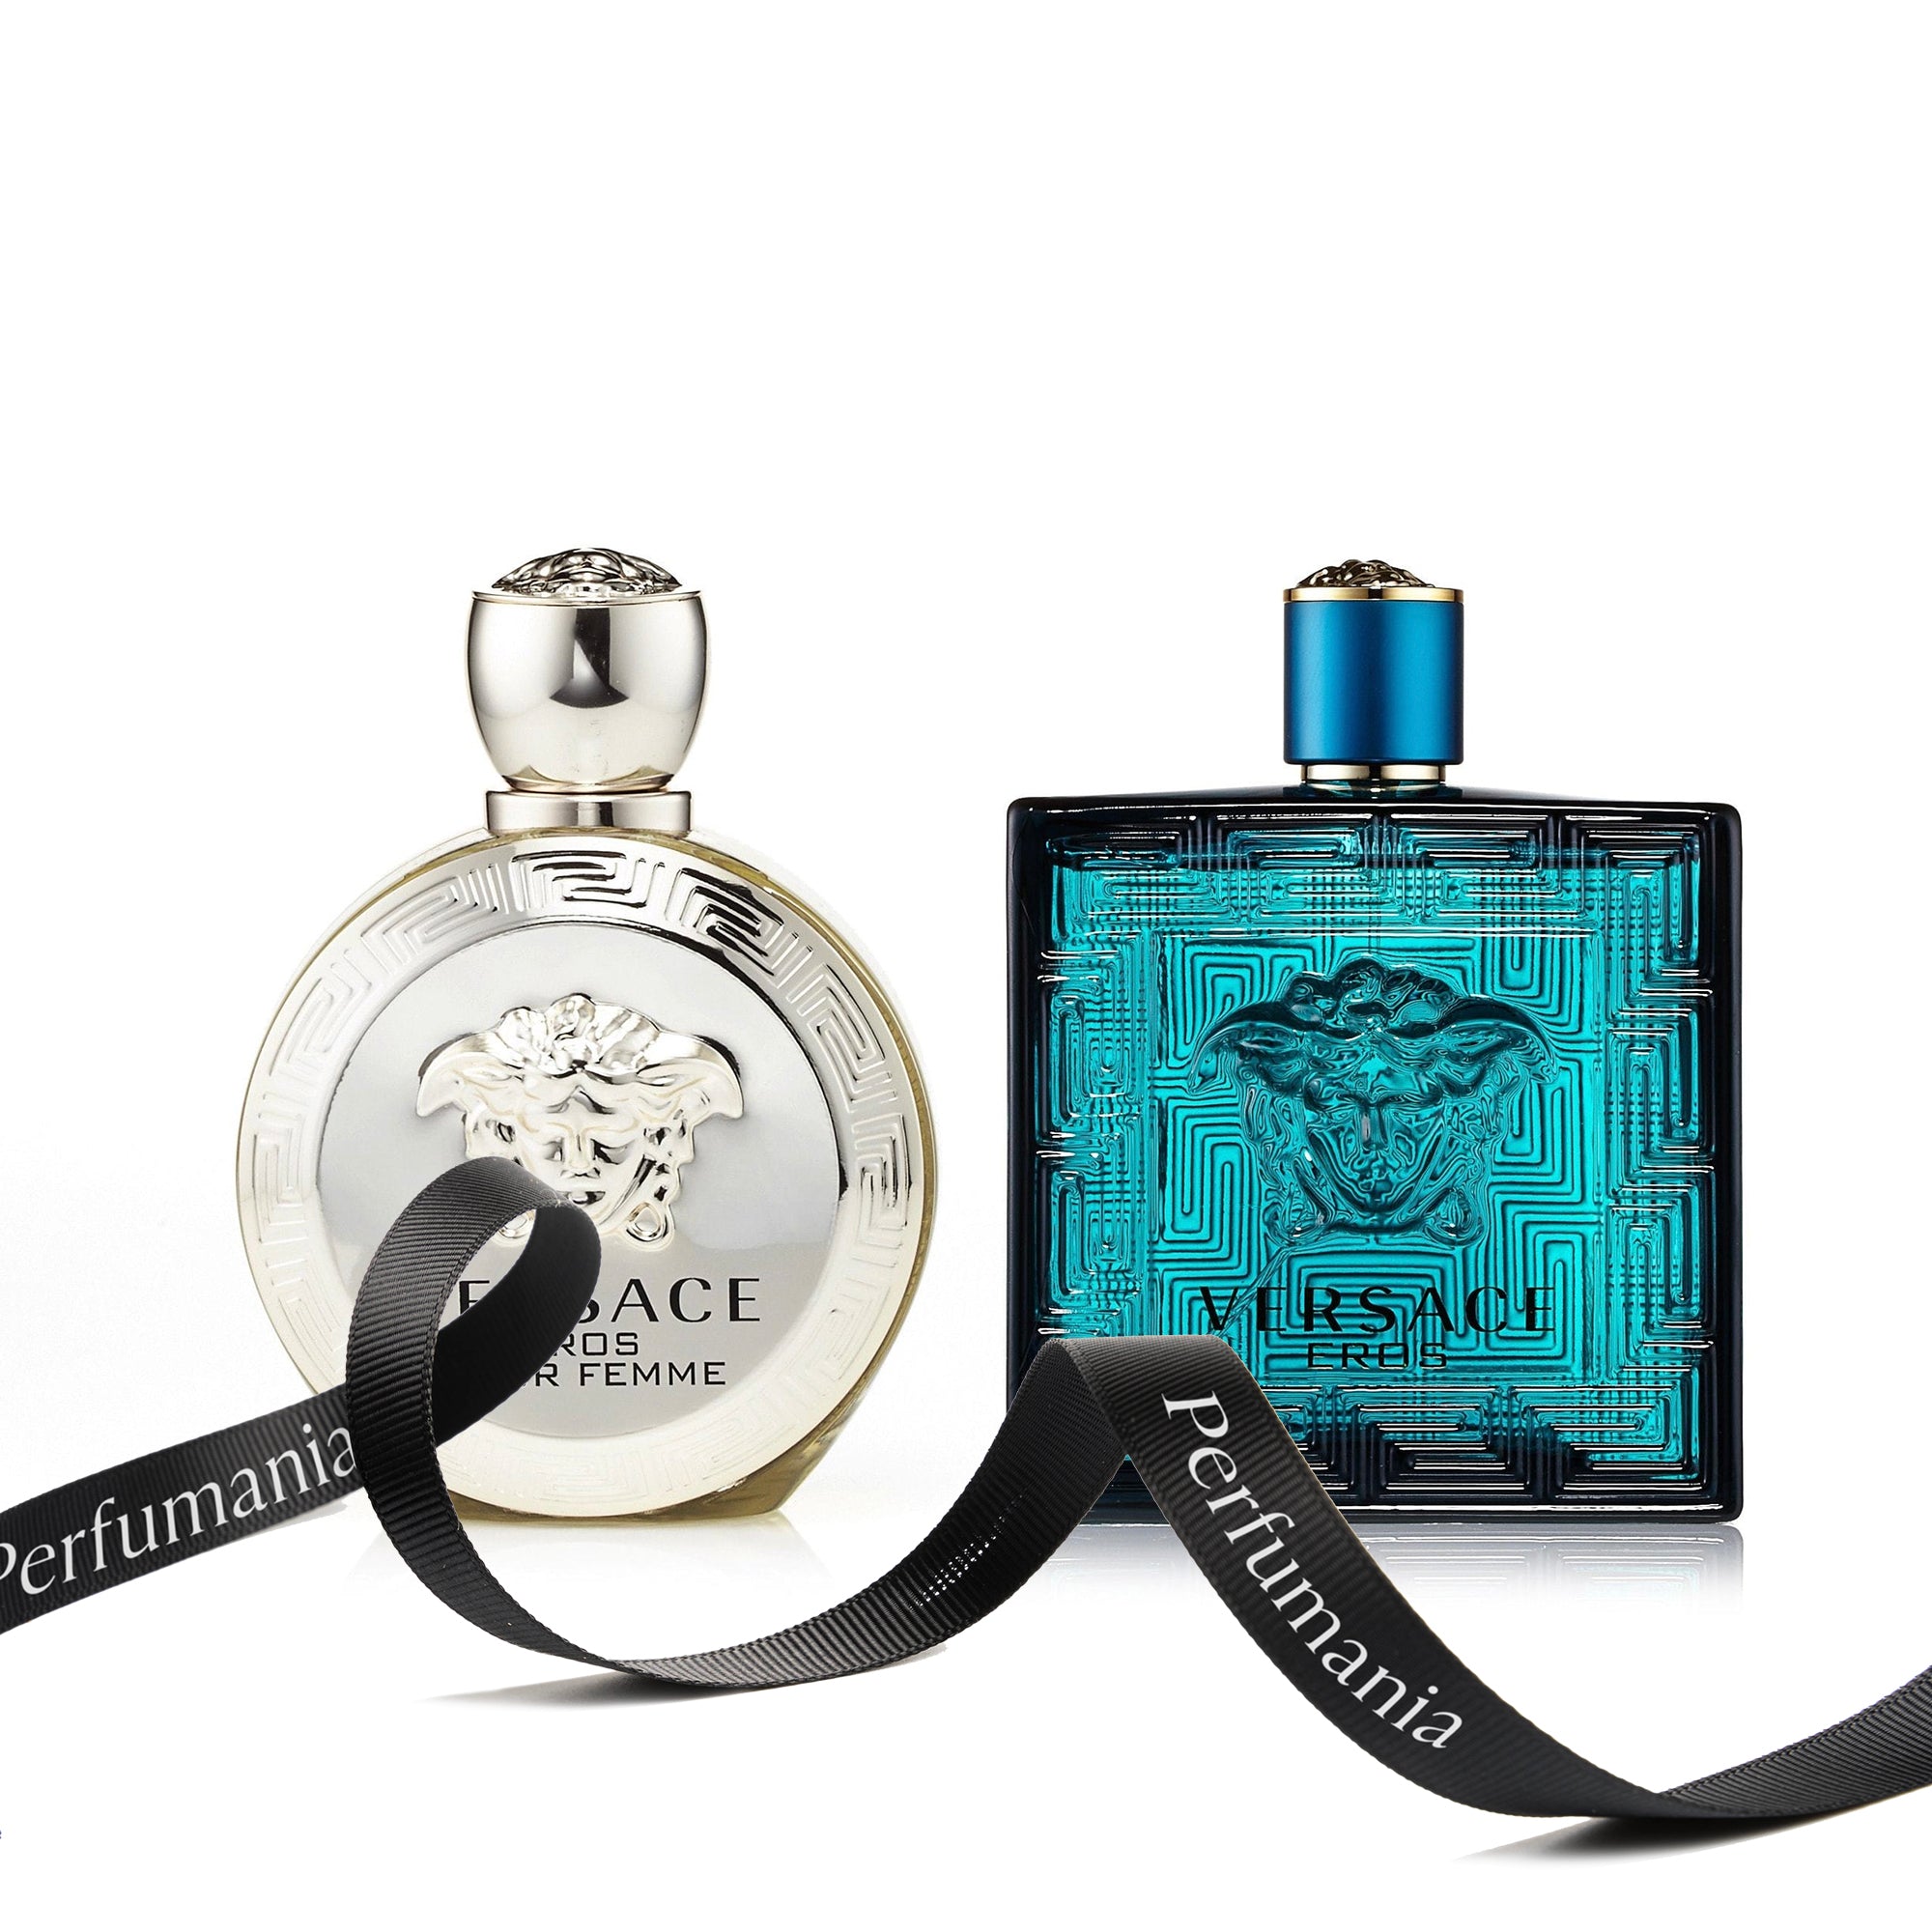 Bundle Deal His & Hers: Eros by Versace for Men and Women Featured image